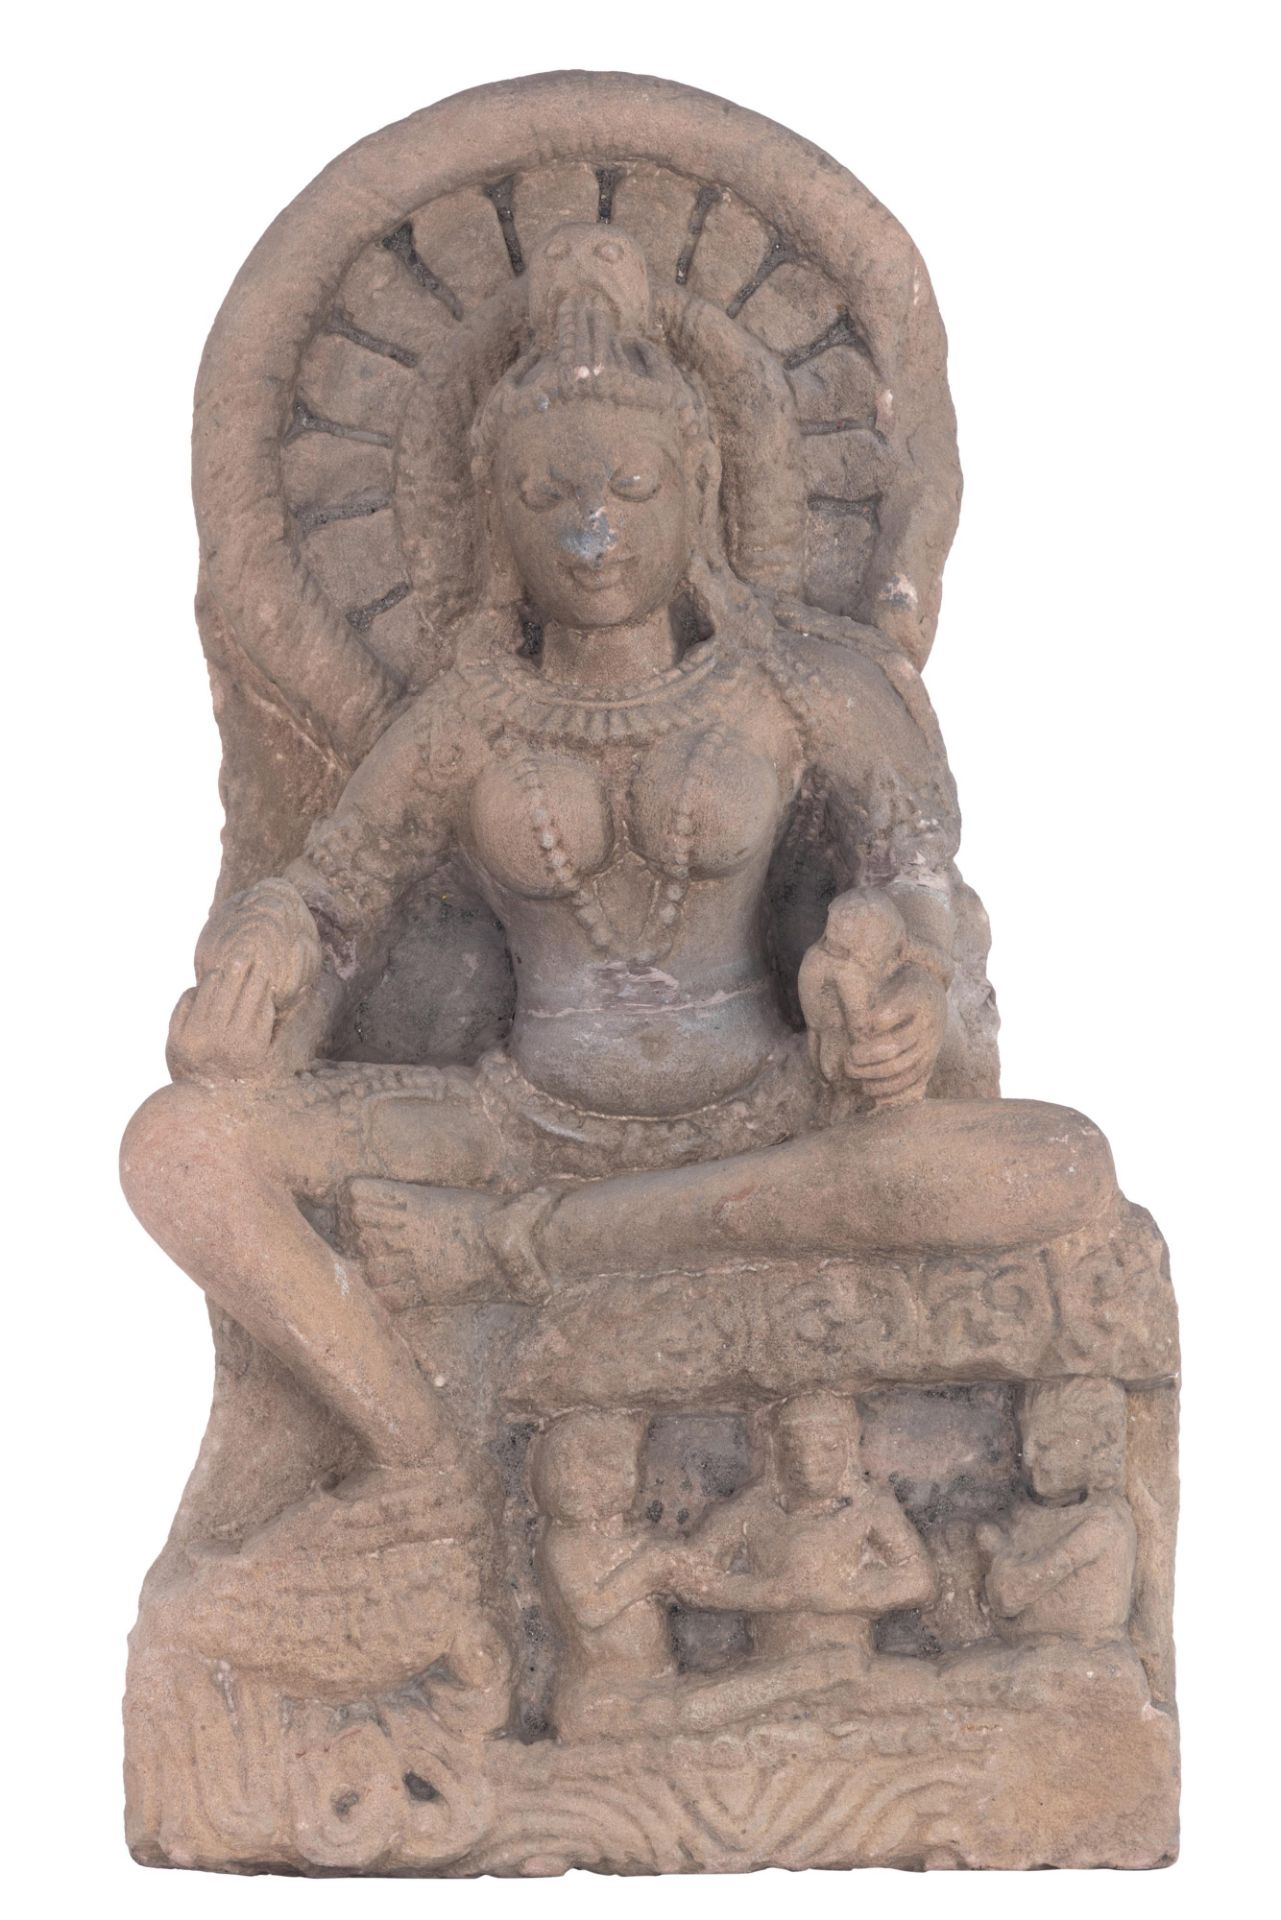 A sandstone architectural fragment of a Hindu god, India, H 58,5 - W 34 - D 19,5 cm